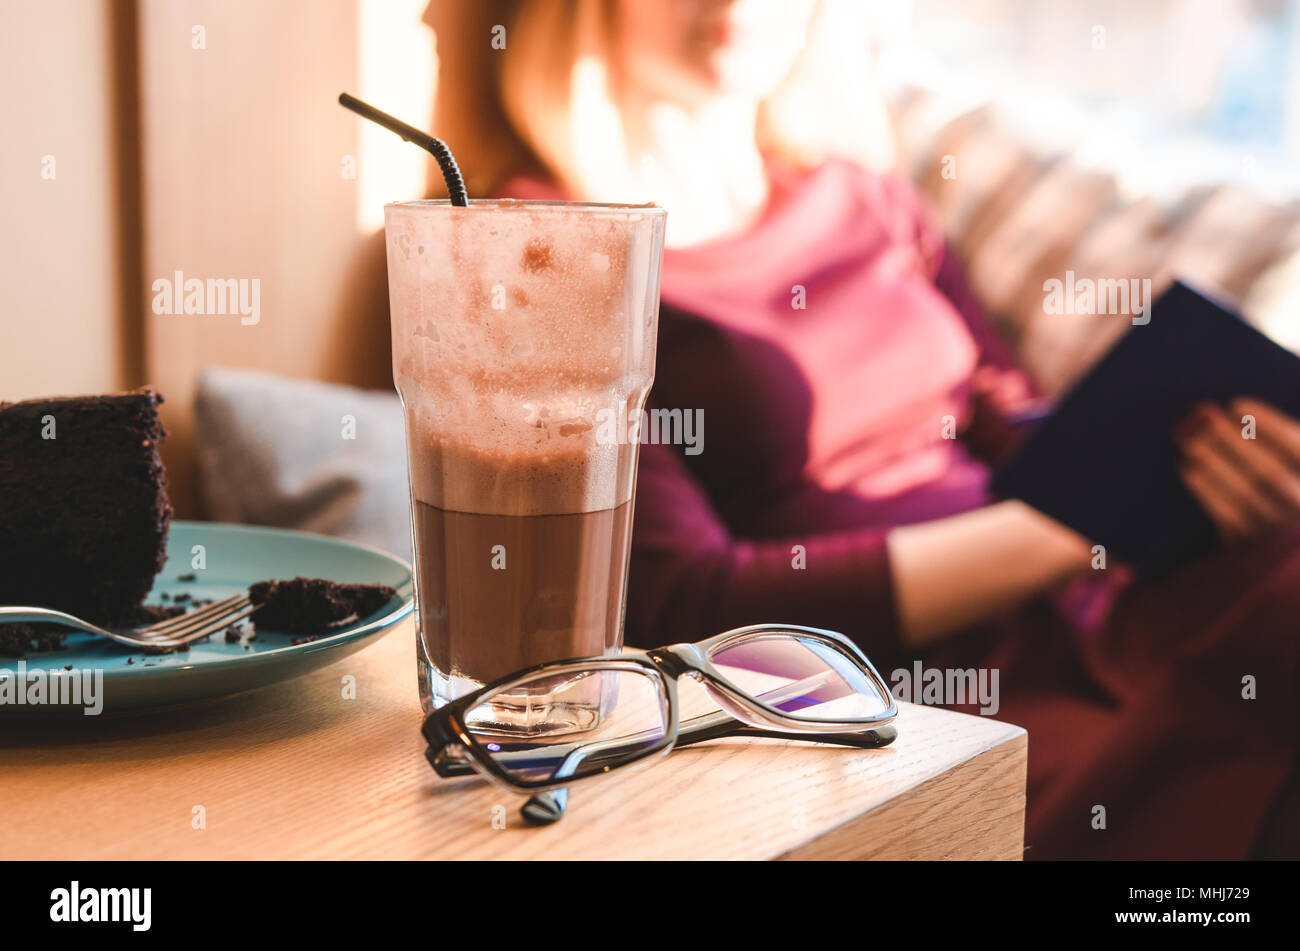 Still life: glasses, cake and coffee. Beautiful girl reading book. Cozy and warm Stock Photo